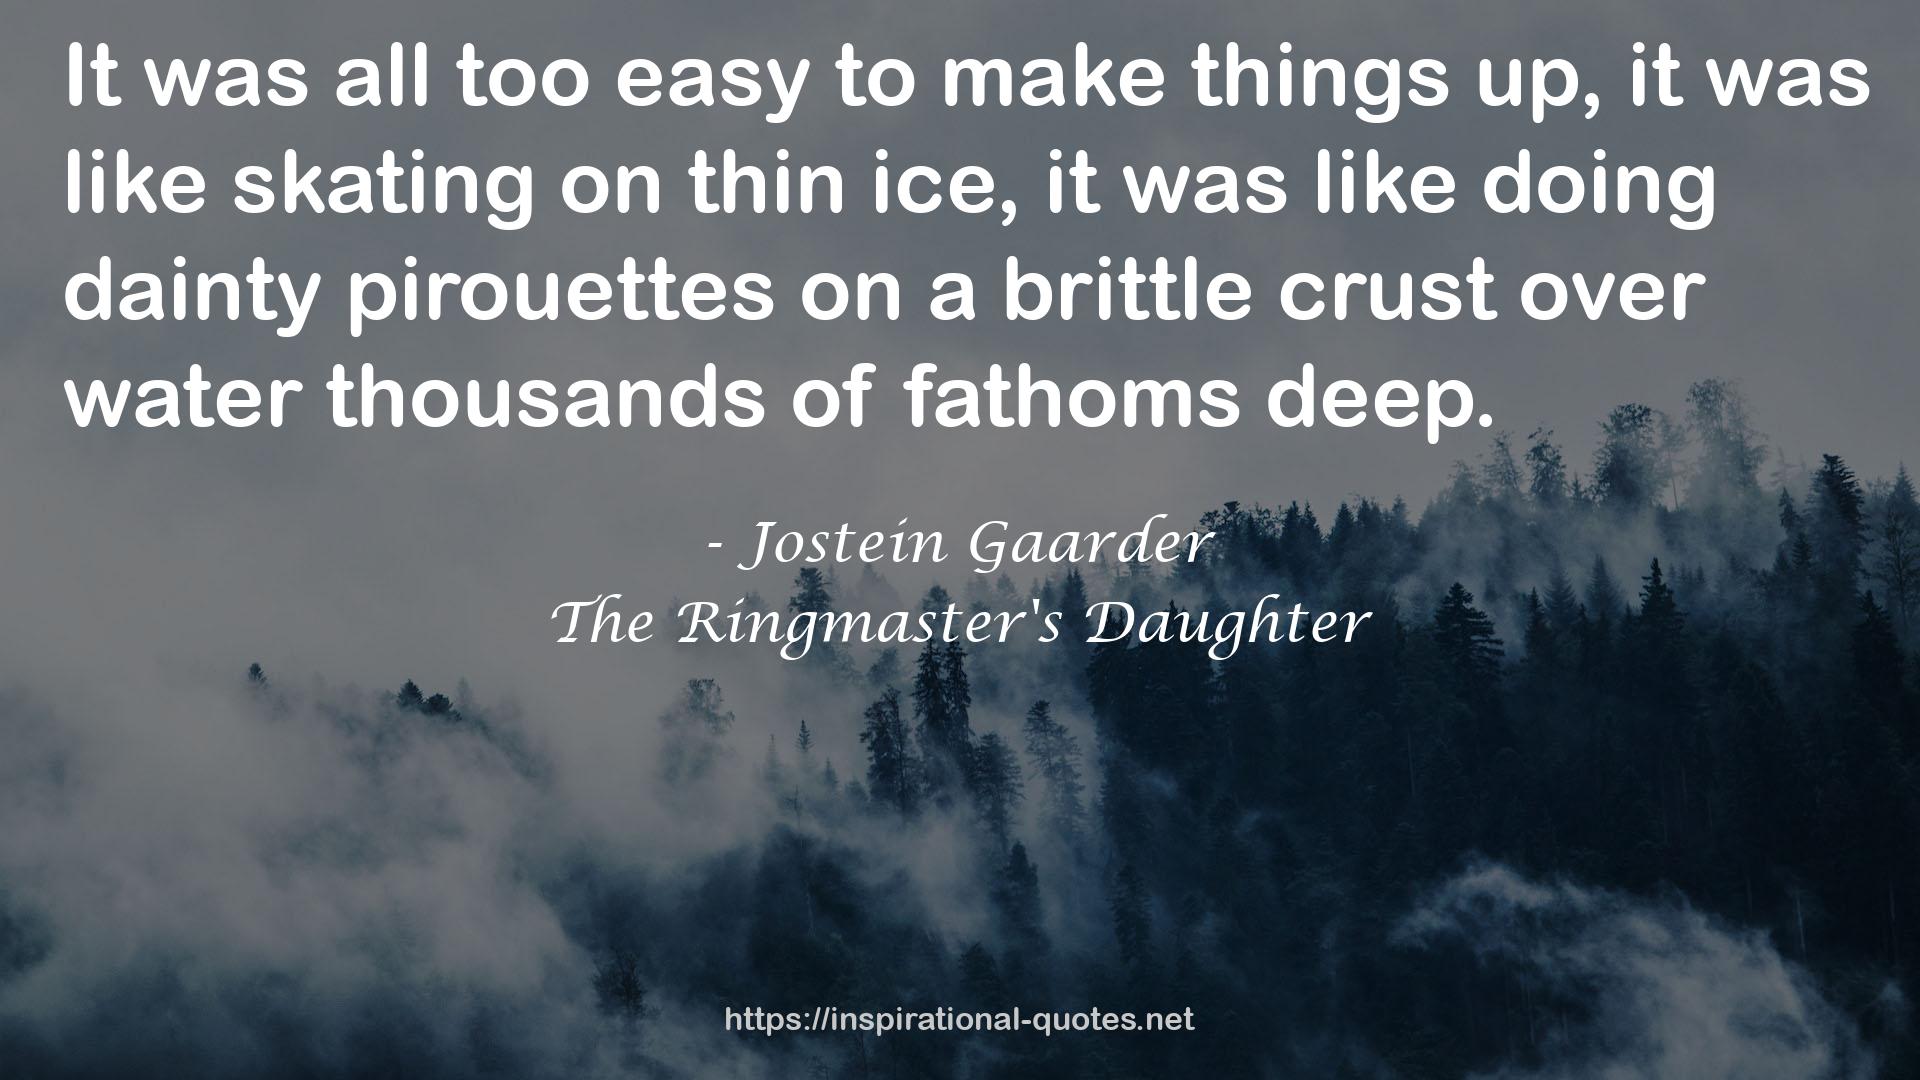 The Ringmaster's Daughter QUOTES